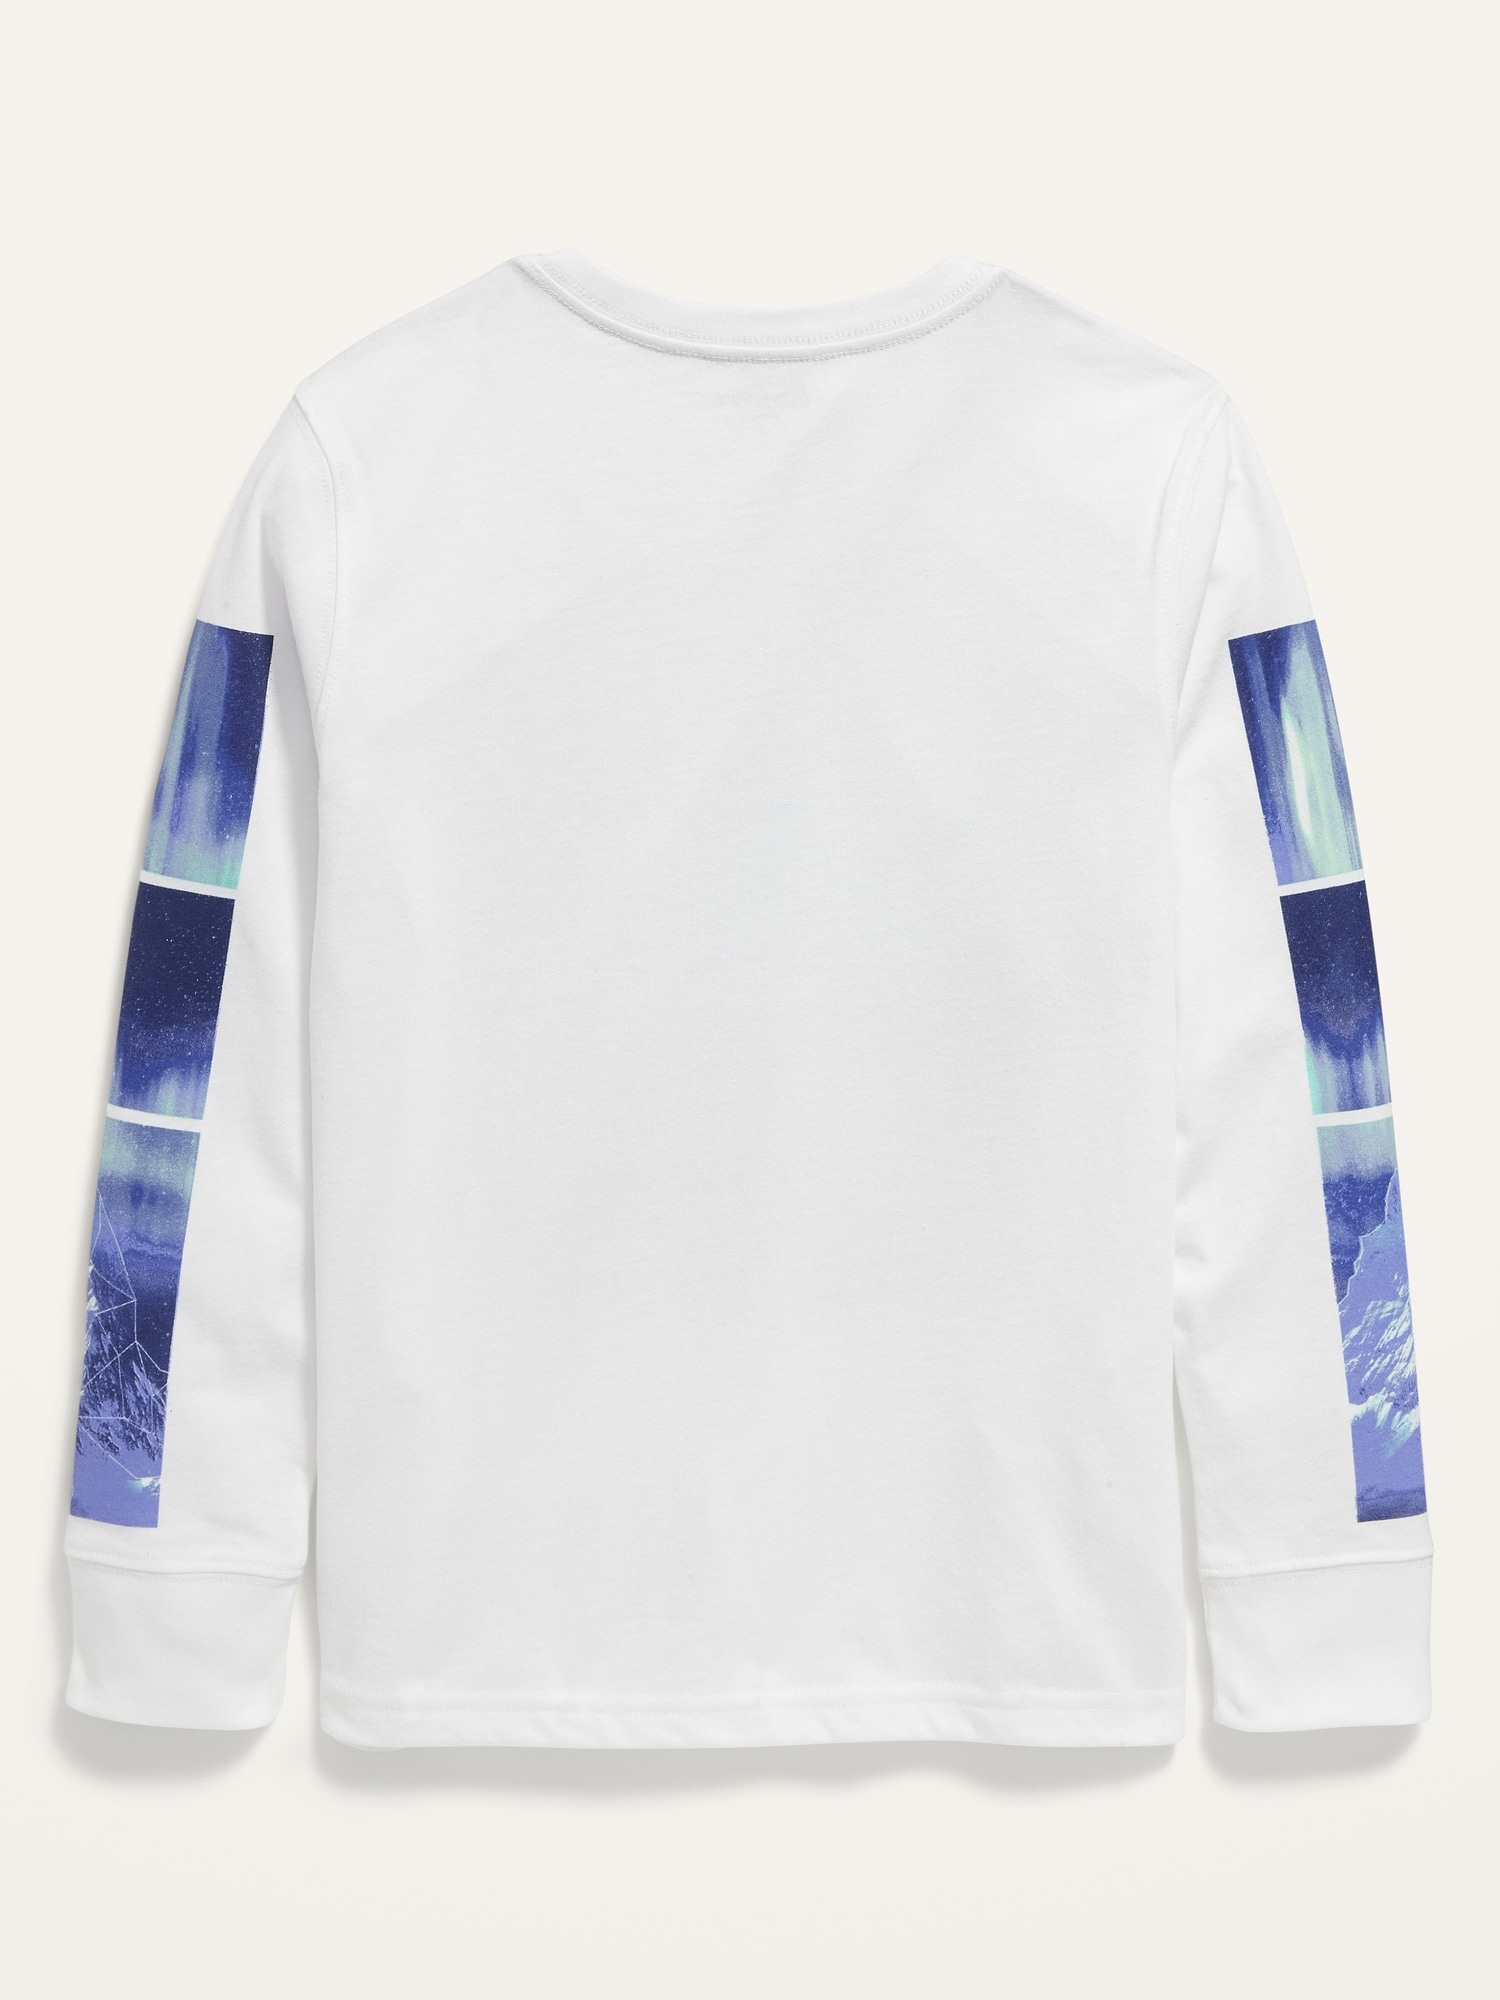 Long-Sleeve Graphic T-Shirt for Boys | Old Navy